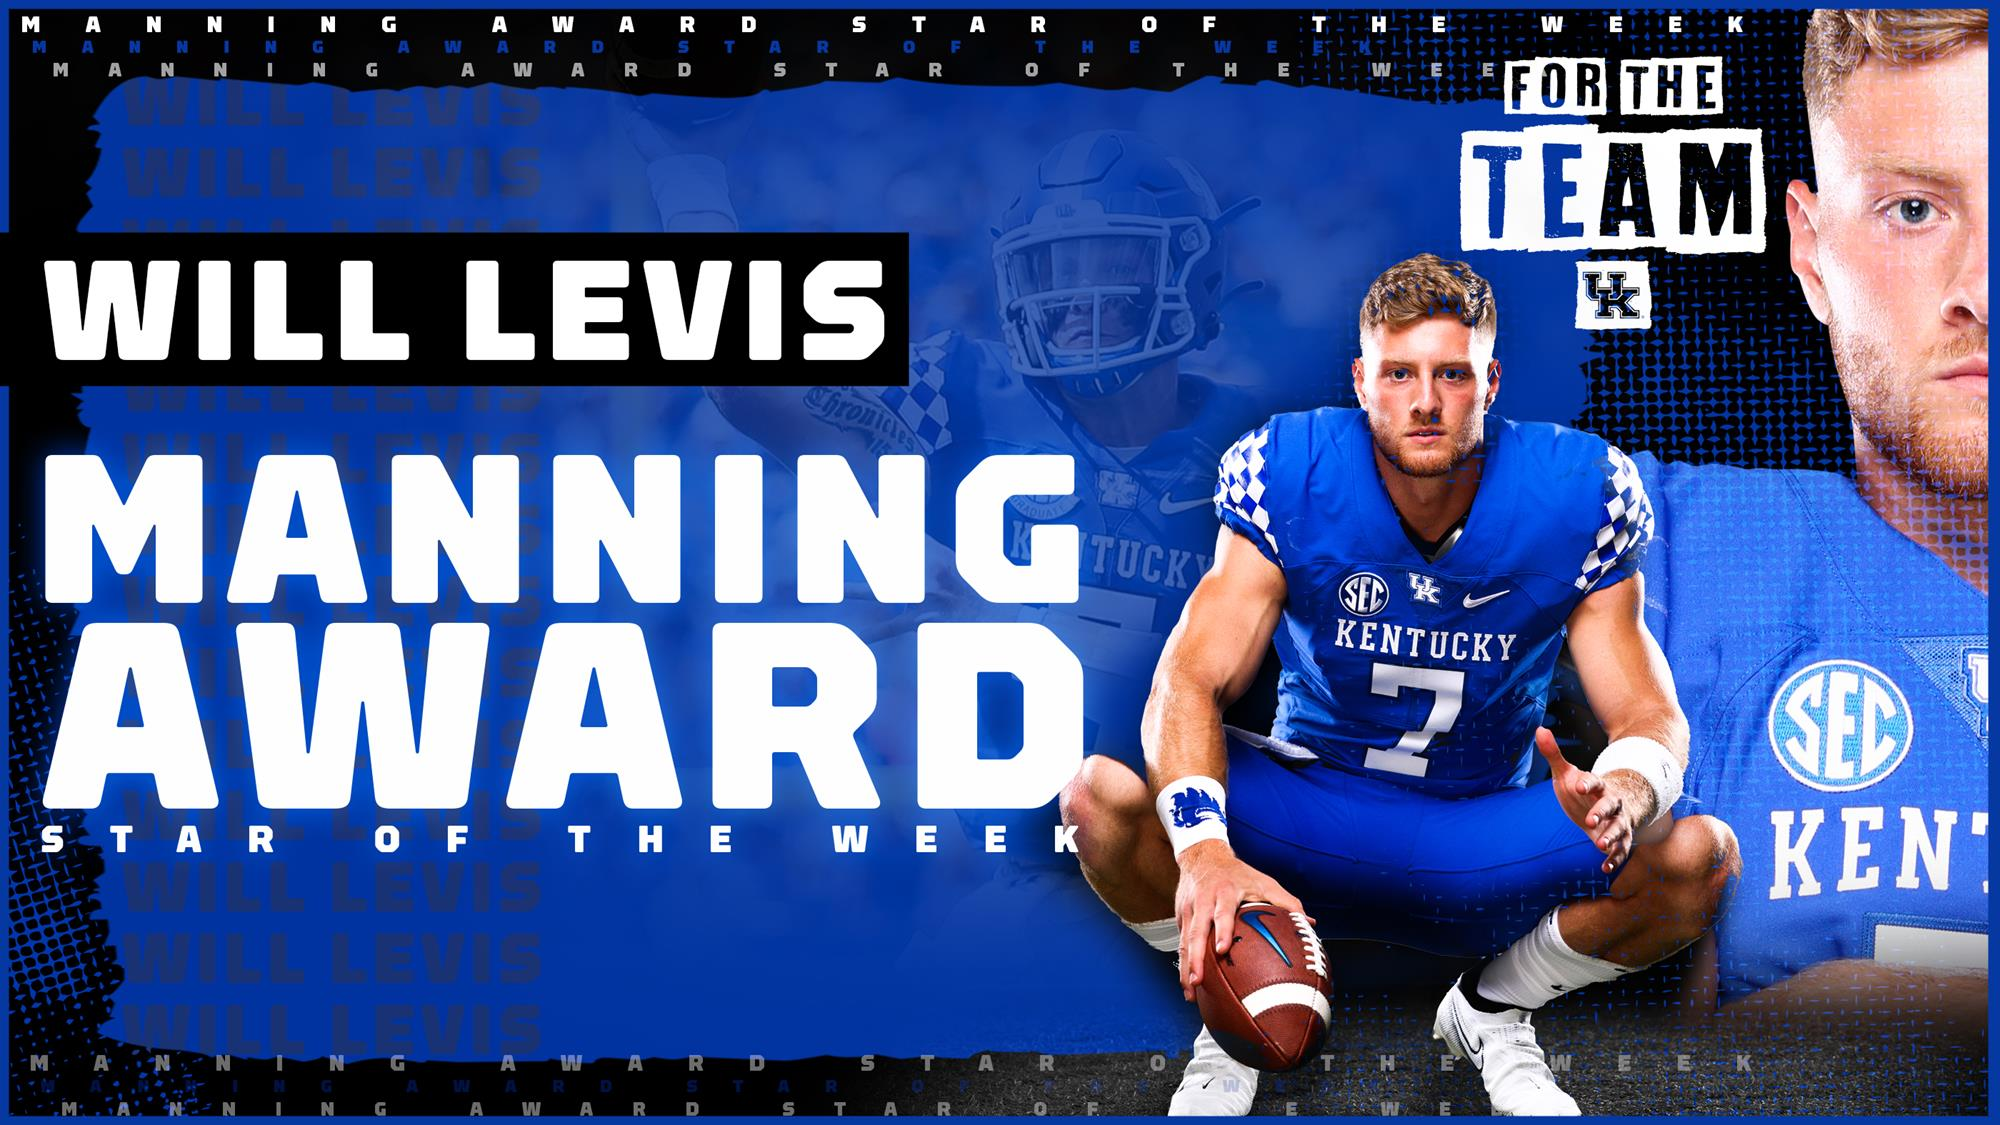 Will Levis Named One of The Manning Award “Stars of the Week”